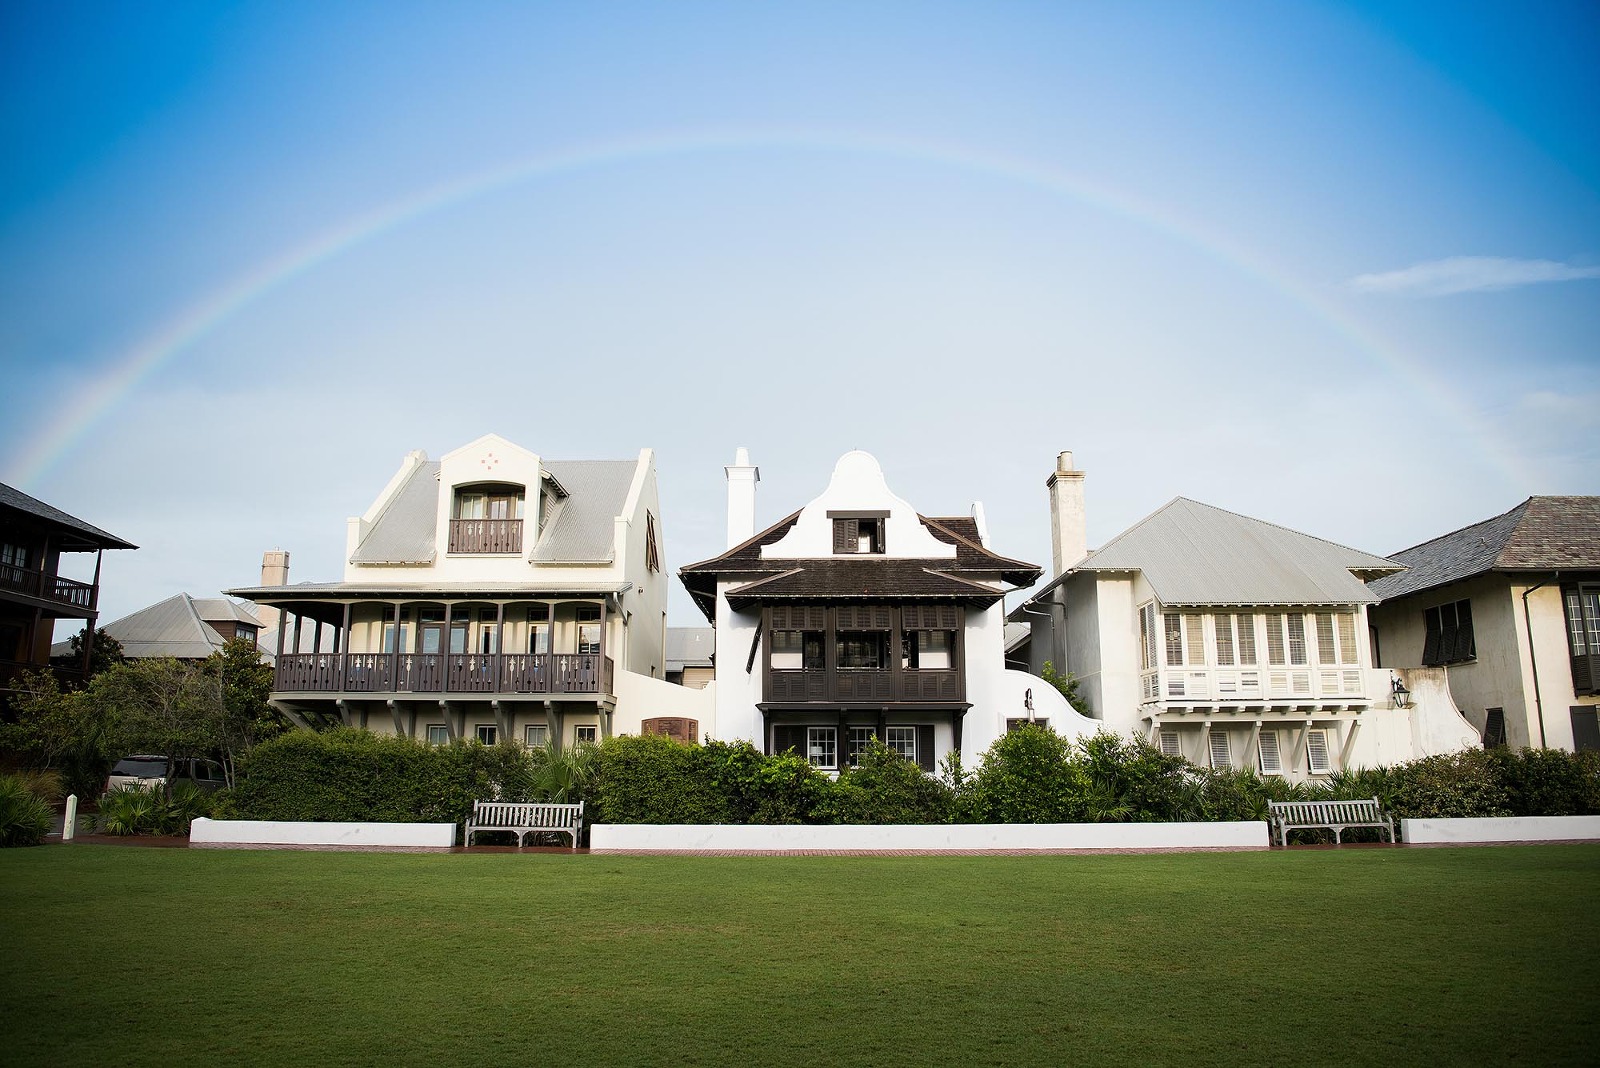 A Rainbow over the Eastern Green in Rosemary Beach Florida |Two Lights Photography